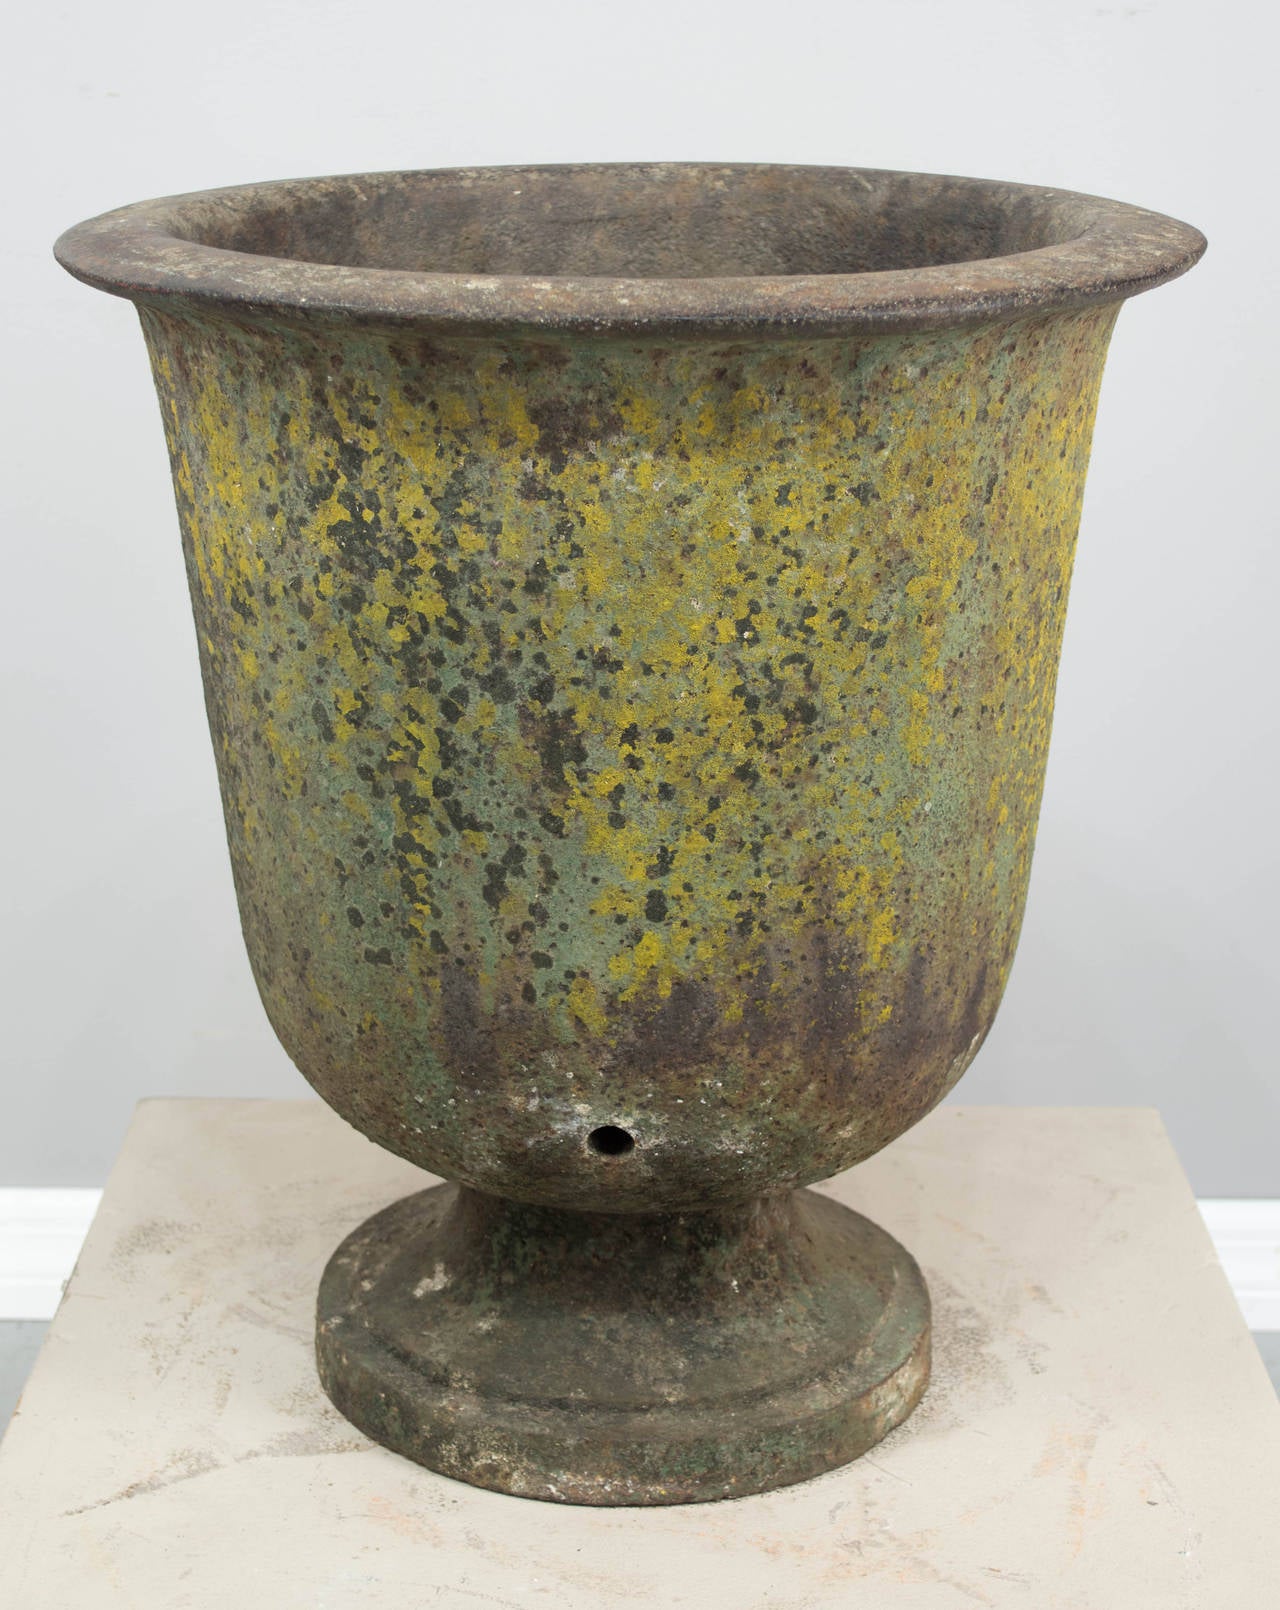 19th century French Charles X heavy cast iron urn, circa 1800-1810. Beautiful old moss colored patina gives this urn the look of glazed pottery. Perfect size for use as a small topiary planter. Weighs approximately 120 pounds. As always, more photos